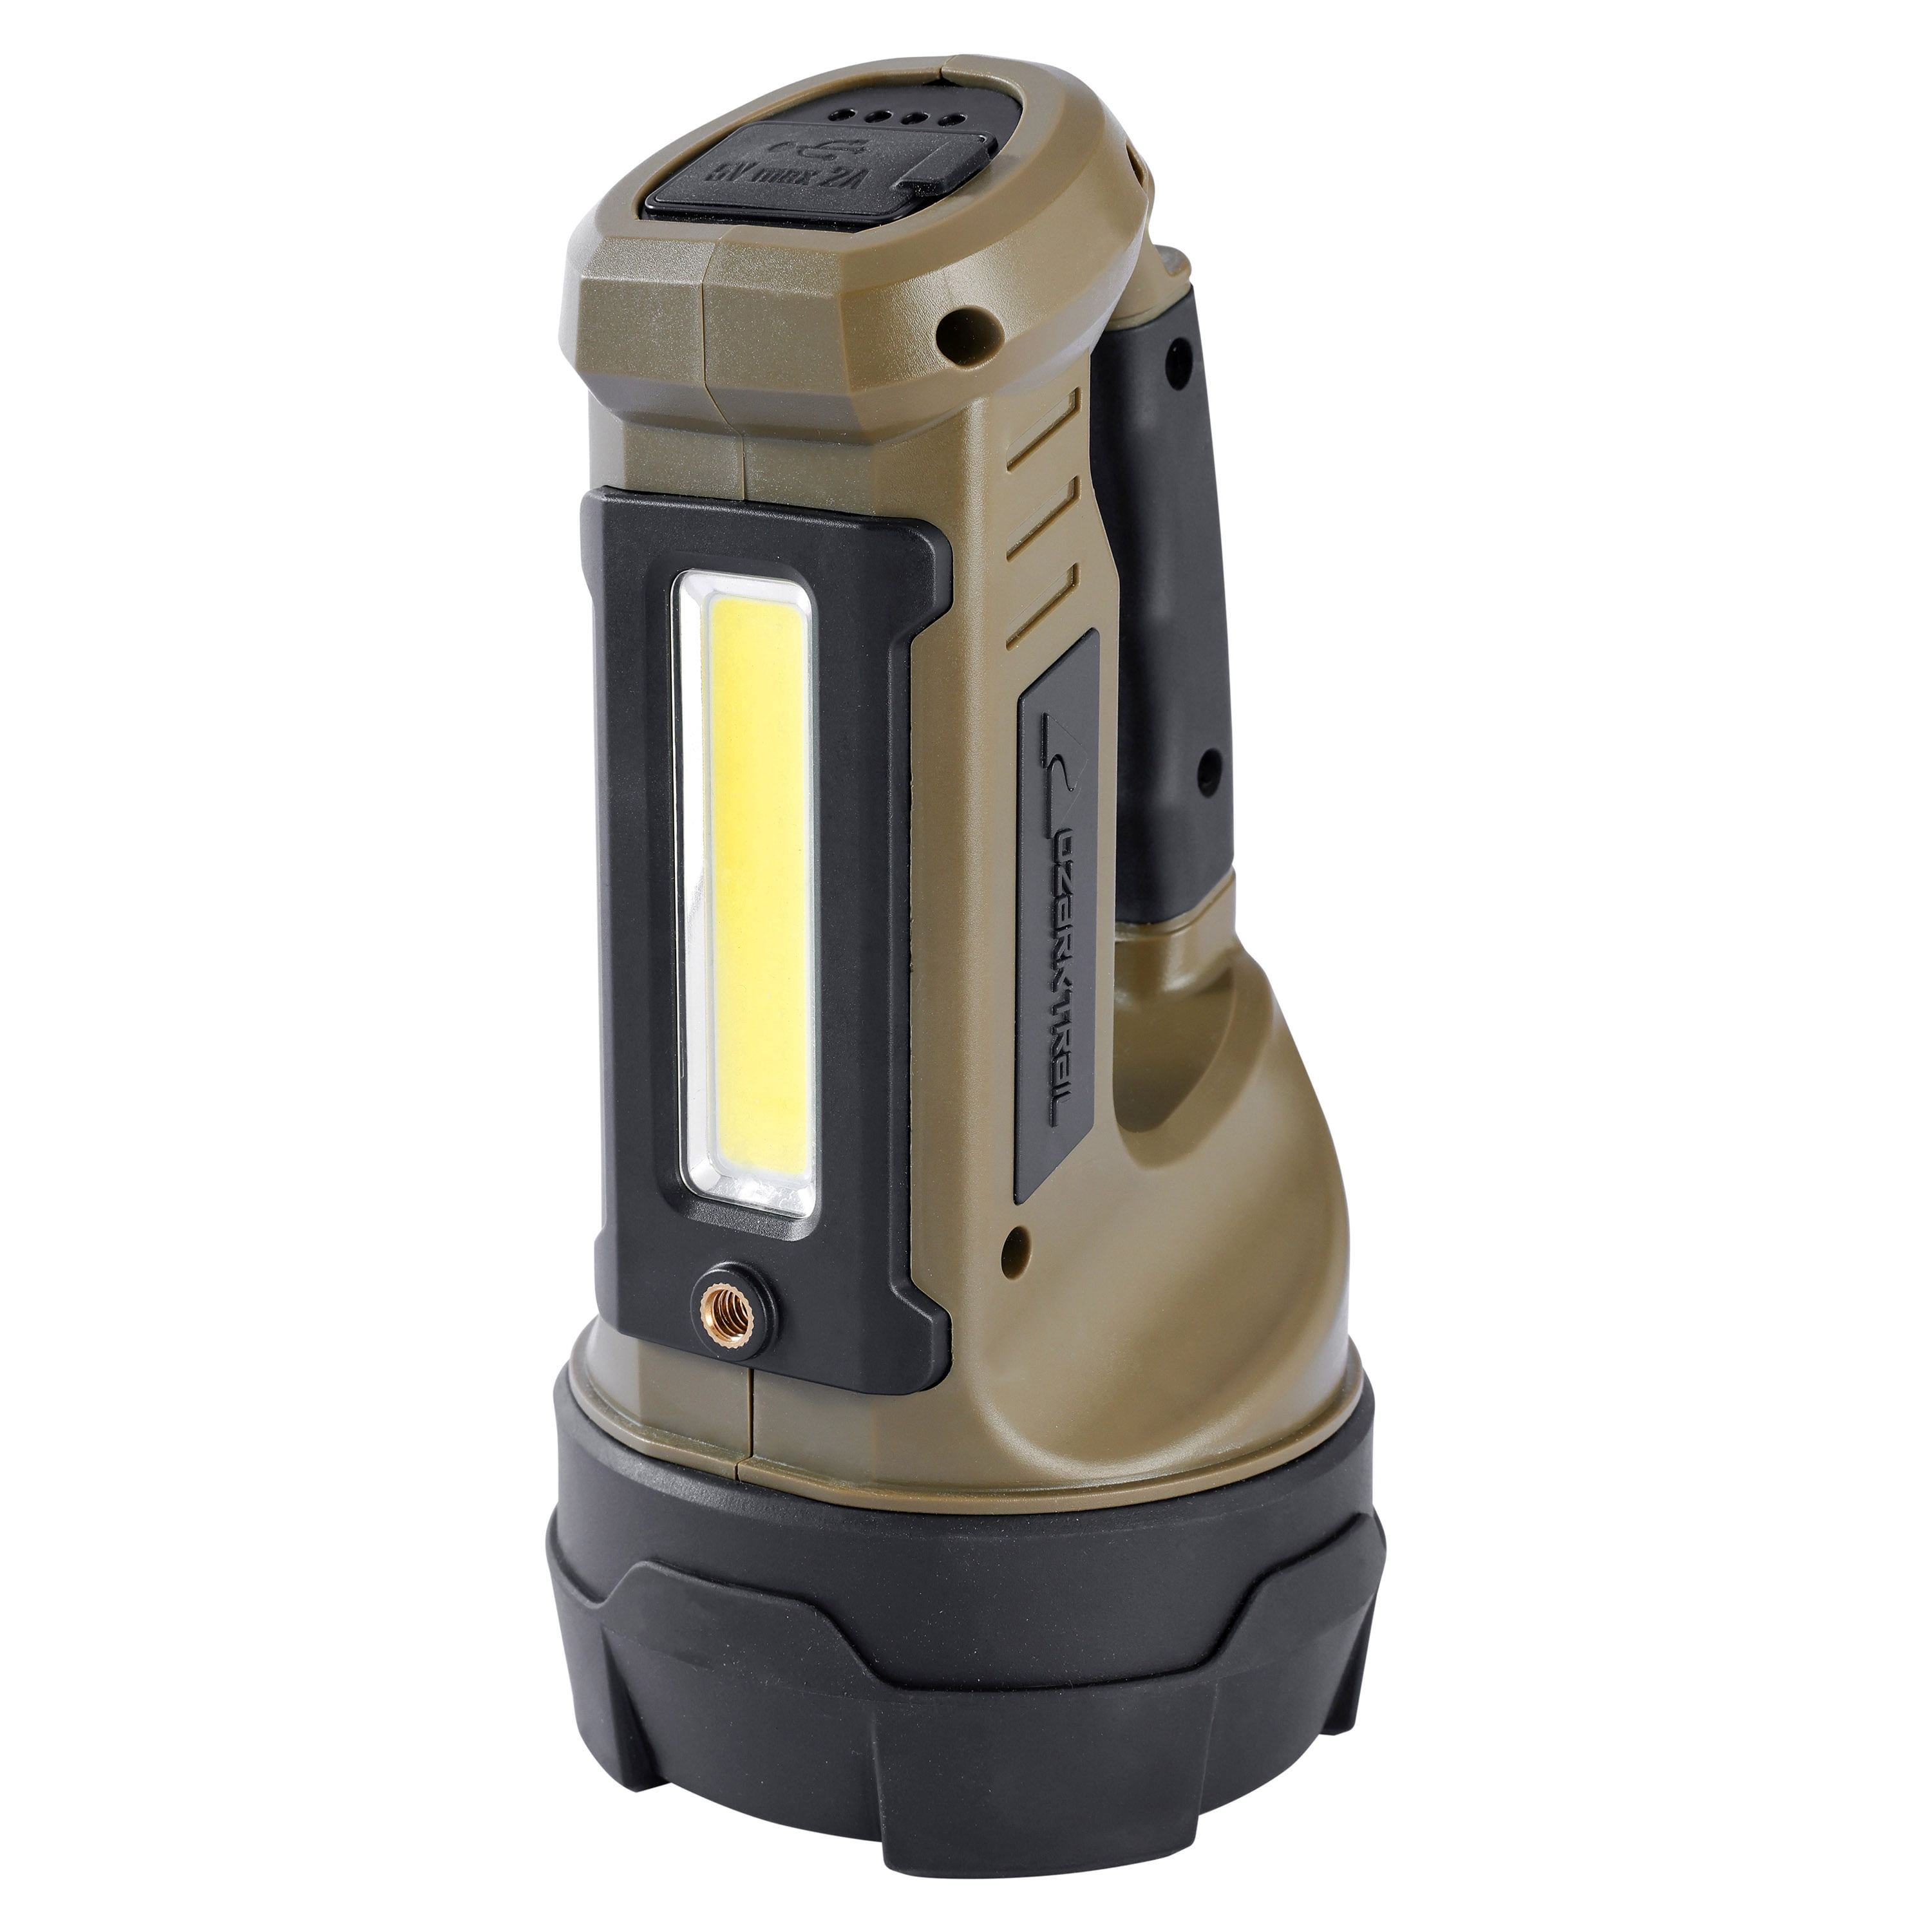 BRENNENSTUHL 1172870 LED 2000LM RECHARGEABLE SPOT LIGHT 20W WITH USB